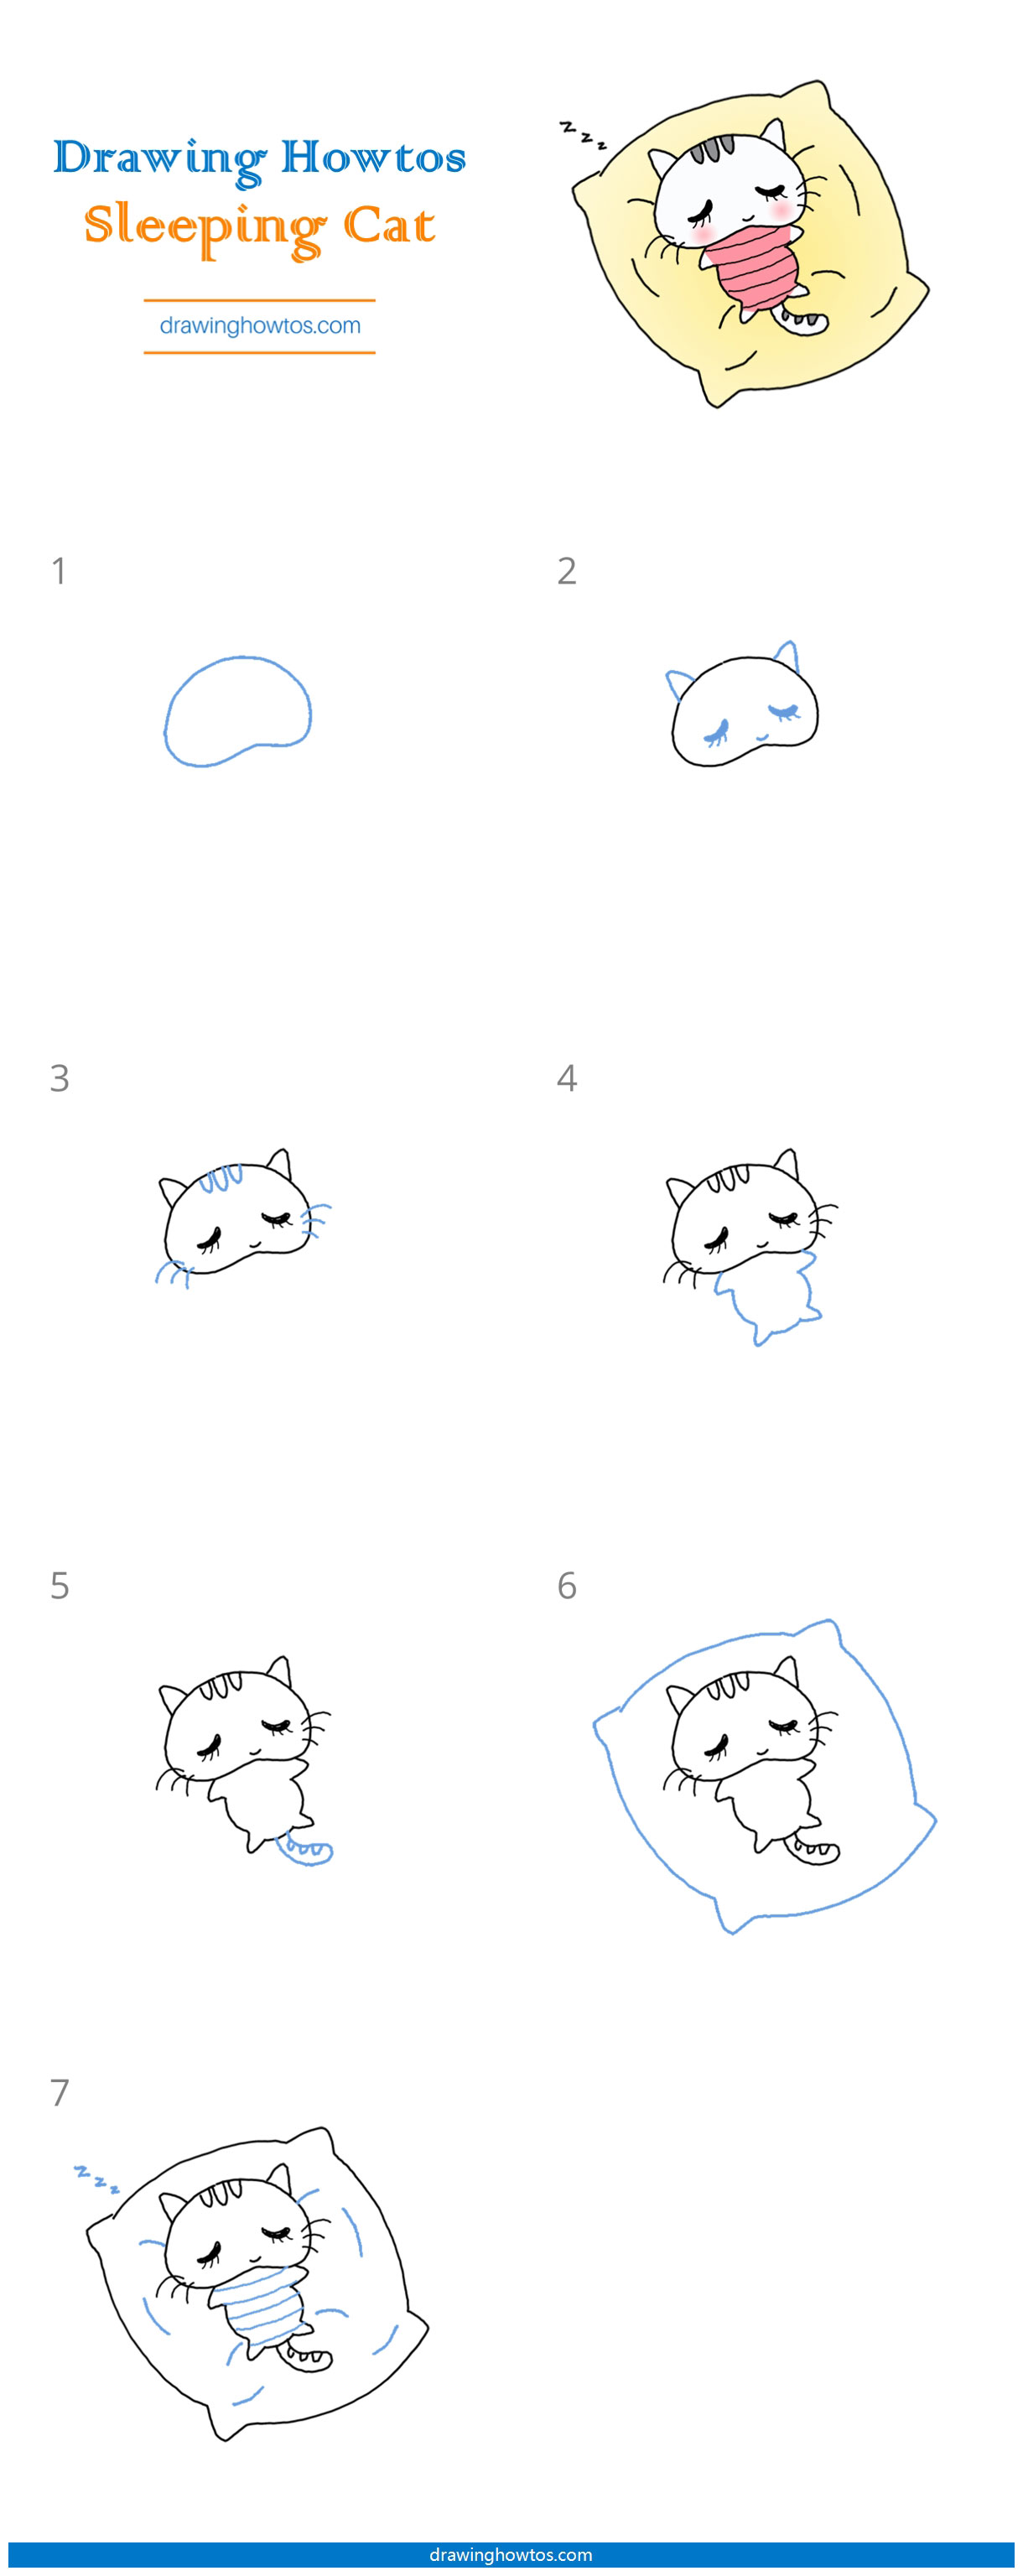 How to Draw a Sleeping Cat Step by Step